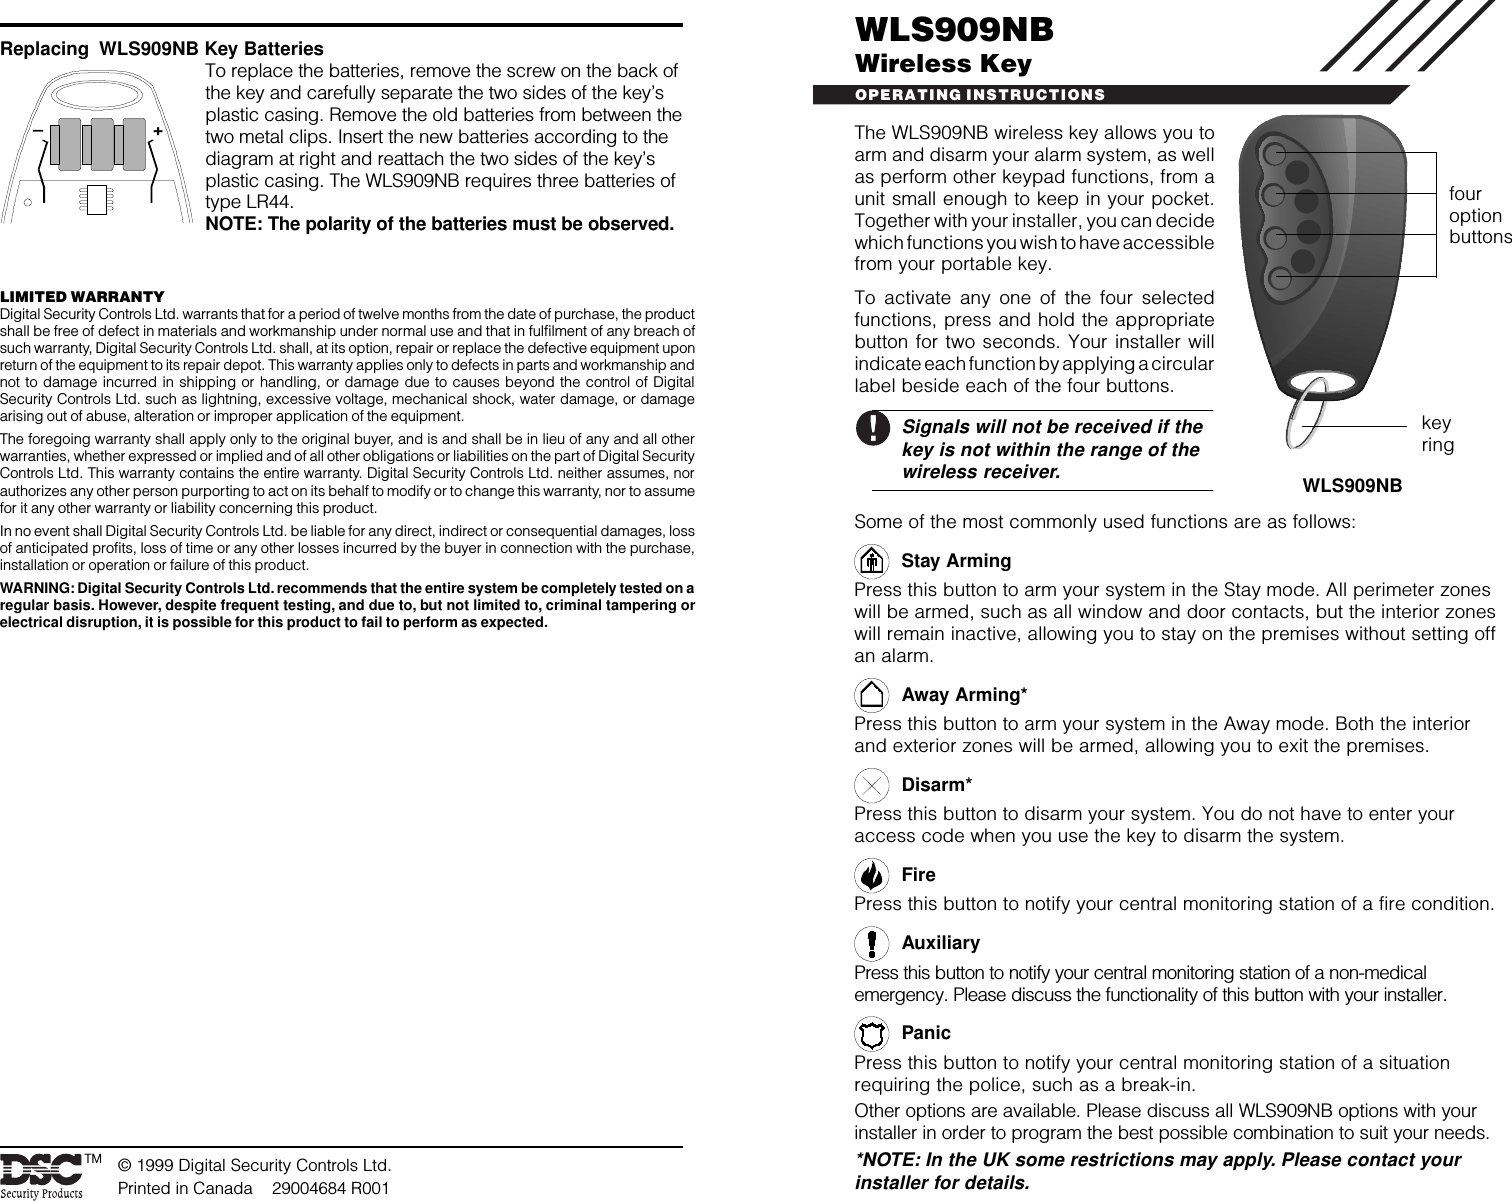 WLS909NBWireless KeyOPERATING INSTRUCTIONS© 1999 Digital Security Controls Ltd.Printed in Canada    29004684 R001The WLS909NB wireless key allows you toarm and disarm your alarm system, as wellas perform other keypad functions, from aunit small enough to keep in your pocket.Together with your installer, you can decidewhich functions you wish to have accessiblefrom your portable key.To activate any one of the four selectedfunctions, press and hold the appropriatebutton for two seconds. Your installer willindicate each function by applying a circularlabel beside each of the four buttons.Signals will not be received if thekey is not within the range of thewireless receiver.Some of the most commonly used functions are as follows:Stay ArmingPress this button to arm your system in the Stay mode. All perimeter zoneswill be armed, such as all window and door contacts, but the interior zoneswill remain inactive, allowing you to stay on the premises without setting offan alarm.Away Arming*Press this button to arm your system in the Away mode. Both the interiorand exterior zones will be armed, allowing you to exit the premises.Disarm*Press this button to disarm your system. You do not have to enter youraccess code when you use the key to disarm the system.FirePress this button to notify your central monitoring station of a fire condition.AuxiliaryPress this button to notify your central monitoring station of a non-medicalemergency. Please discuss the functionality of this button with your installer.PanicPress this button to notify your central monitoring station of a situationrequiring the police, such as a break-in.Other options are available. Please discuss all WLS909NB options with yourinstaller in order to program the best possible combination to suit your needs.*NOTE: In the UK some restrictions may apply. Please contact yourinstaller for details.Replacing  WLS909NB Key BatteriesTo replace the batteries, remove the screw on the back ofthe key and carefully separate the two sides of the key’splastic casing. Remove the old batteries from between thetwo metal clips. Insert the new batteries according to thediagram at right and reattach the two sides of the key’splastic casing. The WLS909NB requires three batteries oftype LR44.NOTE: The polarity of the batteries must be observed.WLS909NBTMkeyringfouroptionbuttons–+LIMITED WARRANTYDigital Security Controls Ltd. warrants that for a period of twelve months from the date of purchase, the productshall be free of defect in materials and workmanship under normal use and that in fulfilment of any breach ofsuch warranty, Digital Security Controls Ltd. shall, at its option, repair or replace the defective equipment uponreturn of the equipment to its repair depot. This warranty applies only to defects in parts and workmanship andnot to damage incurred in shipping or handling, or damage due to causes beyond the control of DigitalSecurity Controls Ltd. such as lightning, excessive voltage, mechanical shock, water damage, or damagearising out of abuse, alteration or improper application of the equipment.The foregoing warranty shall apply only to the original buyer, and is and shall be in lieu of any and all otherwarranties, whether expressed or implied and of all other obligations or liabilities on the part of Digital SecurityControls Ltd. This warranty contains the entire warranty. Digital Security Controls Ltd. neither assumes, norauthorizes any other person purporting to act on its behalf to modify or to change this warranty, nor to assumefor it any other warranty or liability concerning this product.In no event shall Digital Security Controls Ltd. be liable for any direct, indirect or consequential damages, lossof anticipated profits, loss of time or any other losses incurred by the buyer in connection with the purchase,installation or operation or failure of this product.WARNING: Digital Security Controls Ltd. recommends that the entire system be completely tested on aregular basis. However, despite frequent testing, and due to, but not limited to, criminal tampering orelectrical disruption, it is possible for this product to fail to perform as expected.